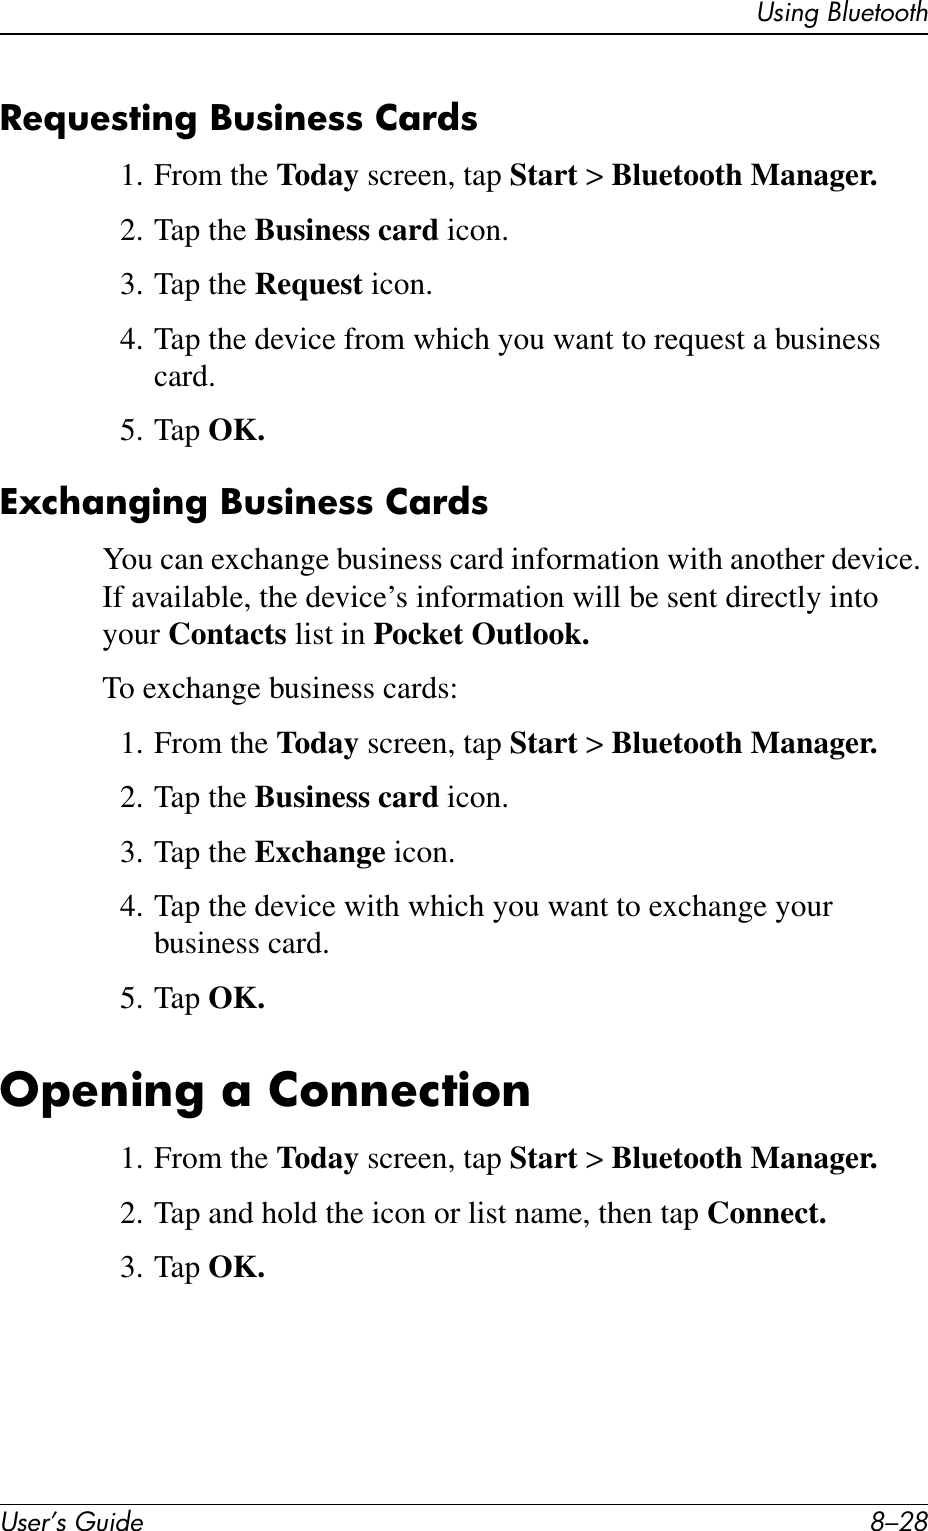 User’s Guide 8–28Using BluetoothRequesting Business Cards1. From the Today screen, tap Start &gt; Bluetooth Manager.2. Tap the Business card icon.3. Tap the Request icon.4. Tap the device from which you want to request a business card.5. Tap OK.Exchanging Business CardsYou can exchange business card information with another device. If available, the device’s information will be sent directly into your Contacts list in Pocket Outlook.To exchange business cards:1. From the Today screen, tap Start &gt; Bluetooth Manager.2. Tap the Business card icon.3. Tap the Exchange icon.4. Tap the device with which you want to exchange your business card.5. Tap OK.Opening a Connection1. From the Today screen, tap Start &gt; Bluetooth Manager.2. Tap and hold the icon or list name, then tap Connect.3. Tap OK.